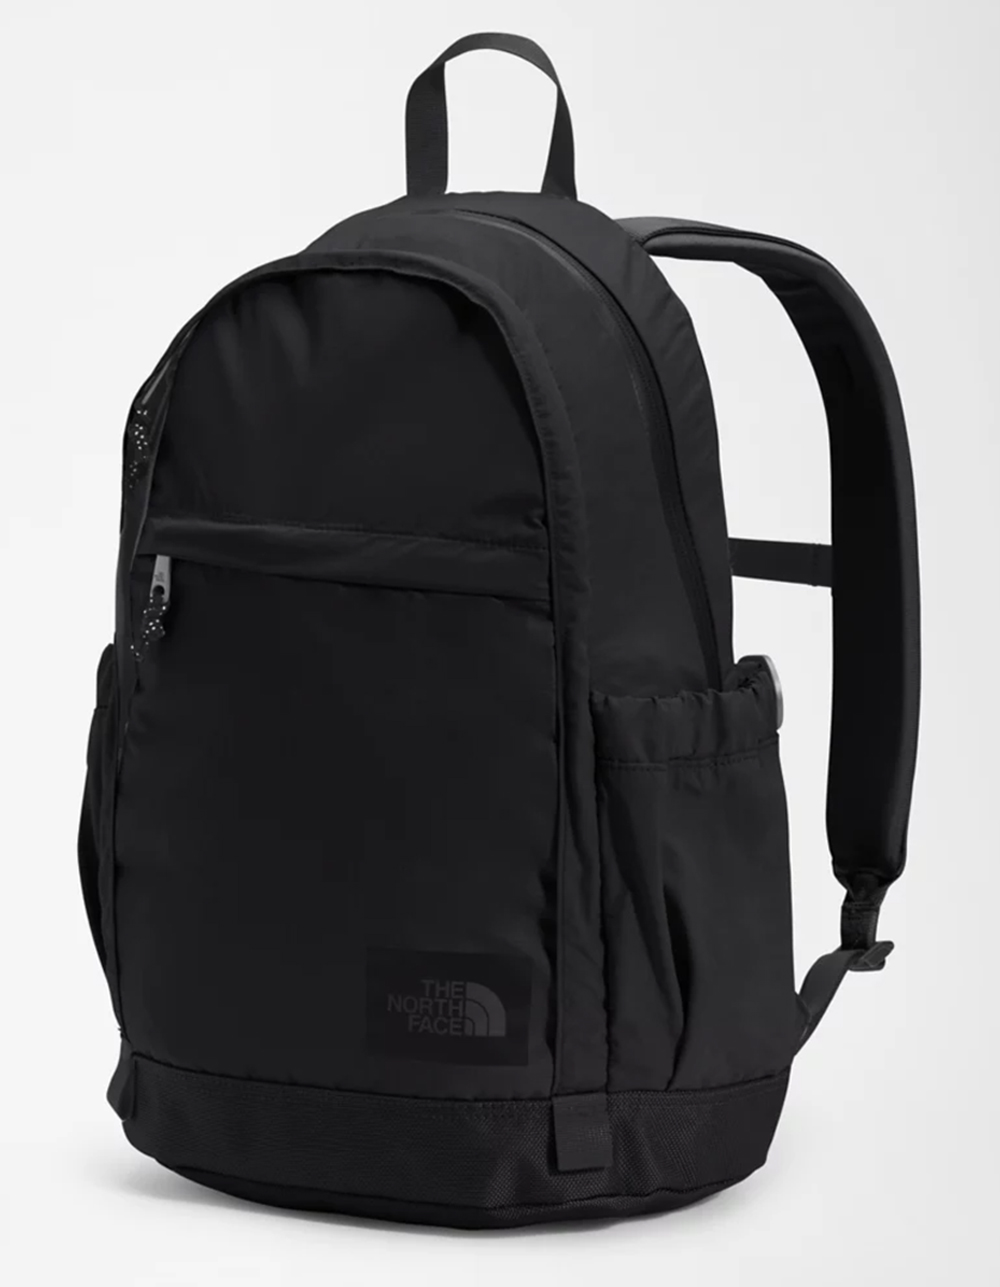 THE NORTH FACE Mountain Daypack - BLACK | Tillys